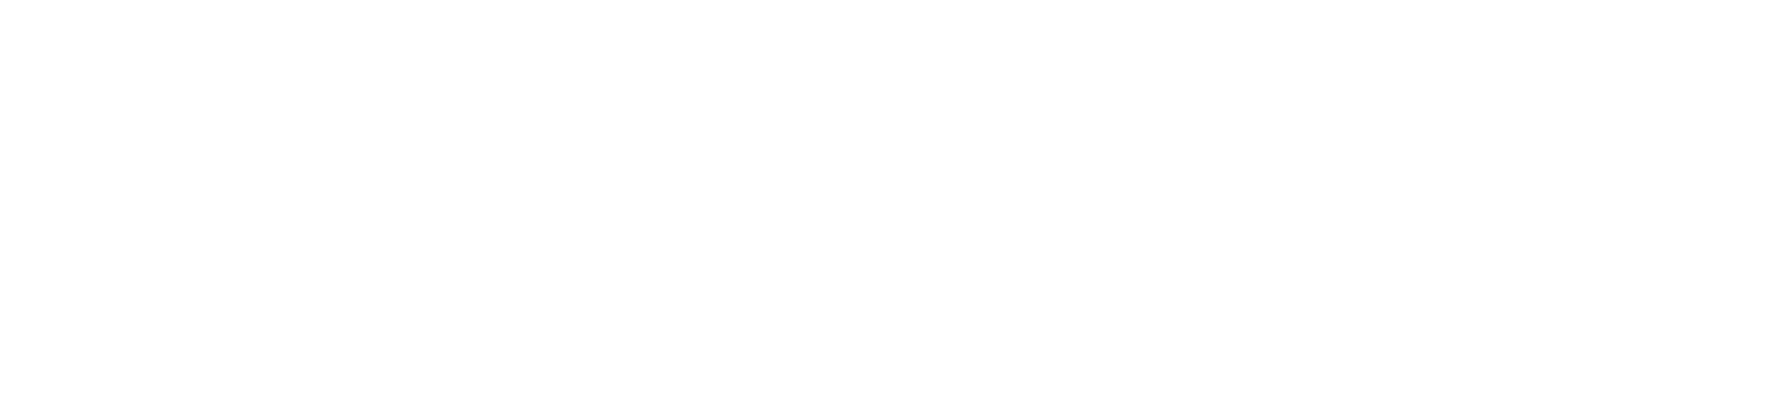 PUFsecurity | PUF-based Security IP Solutions | Secure the Connected World